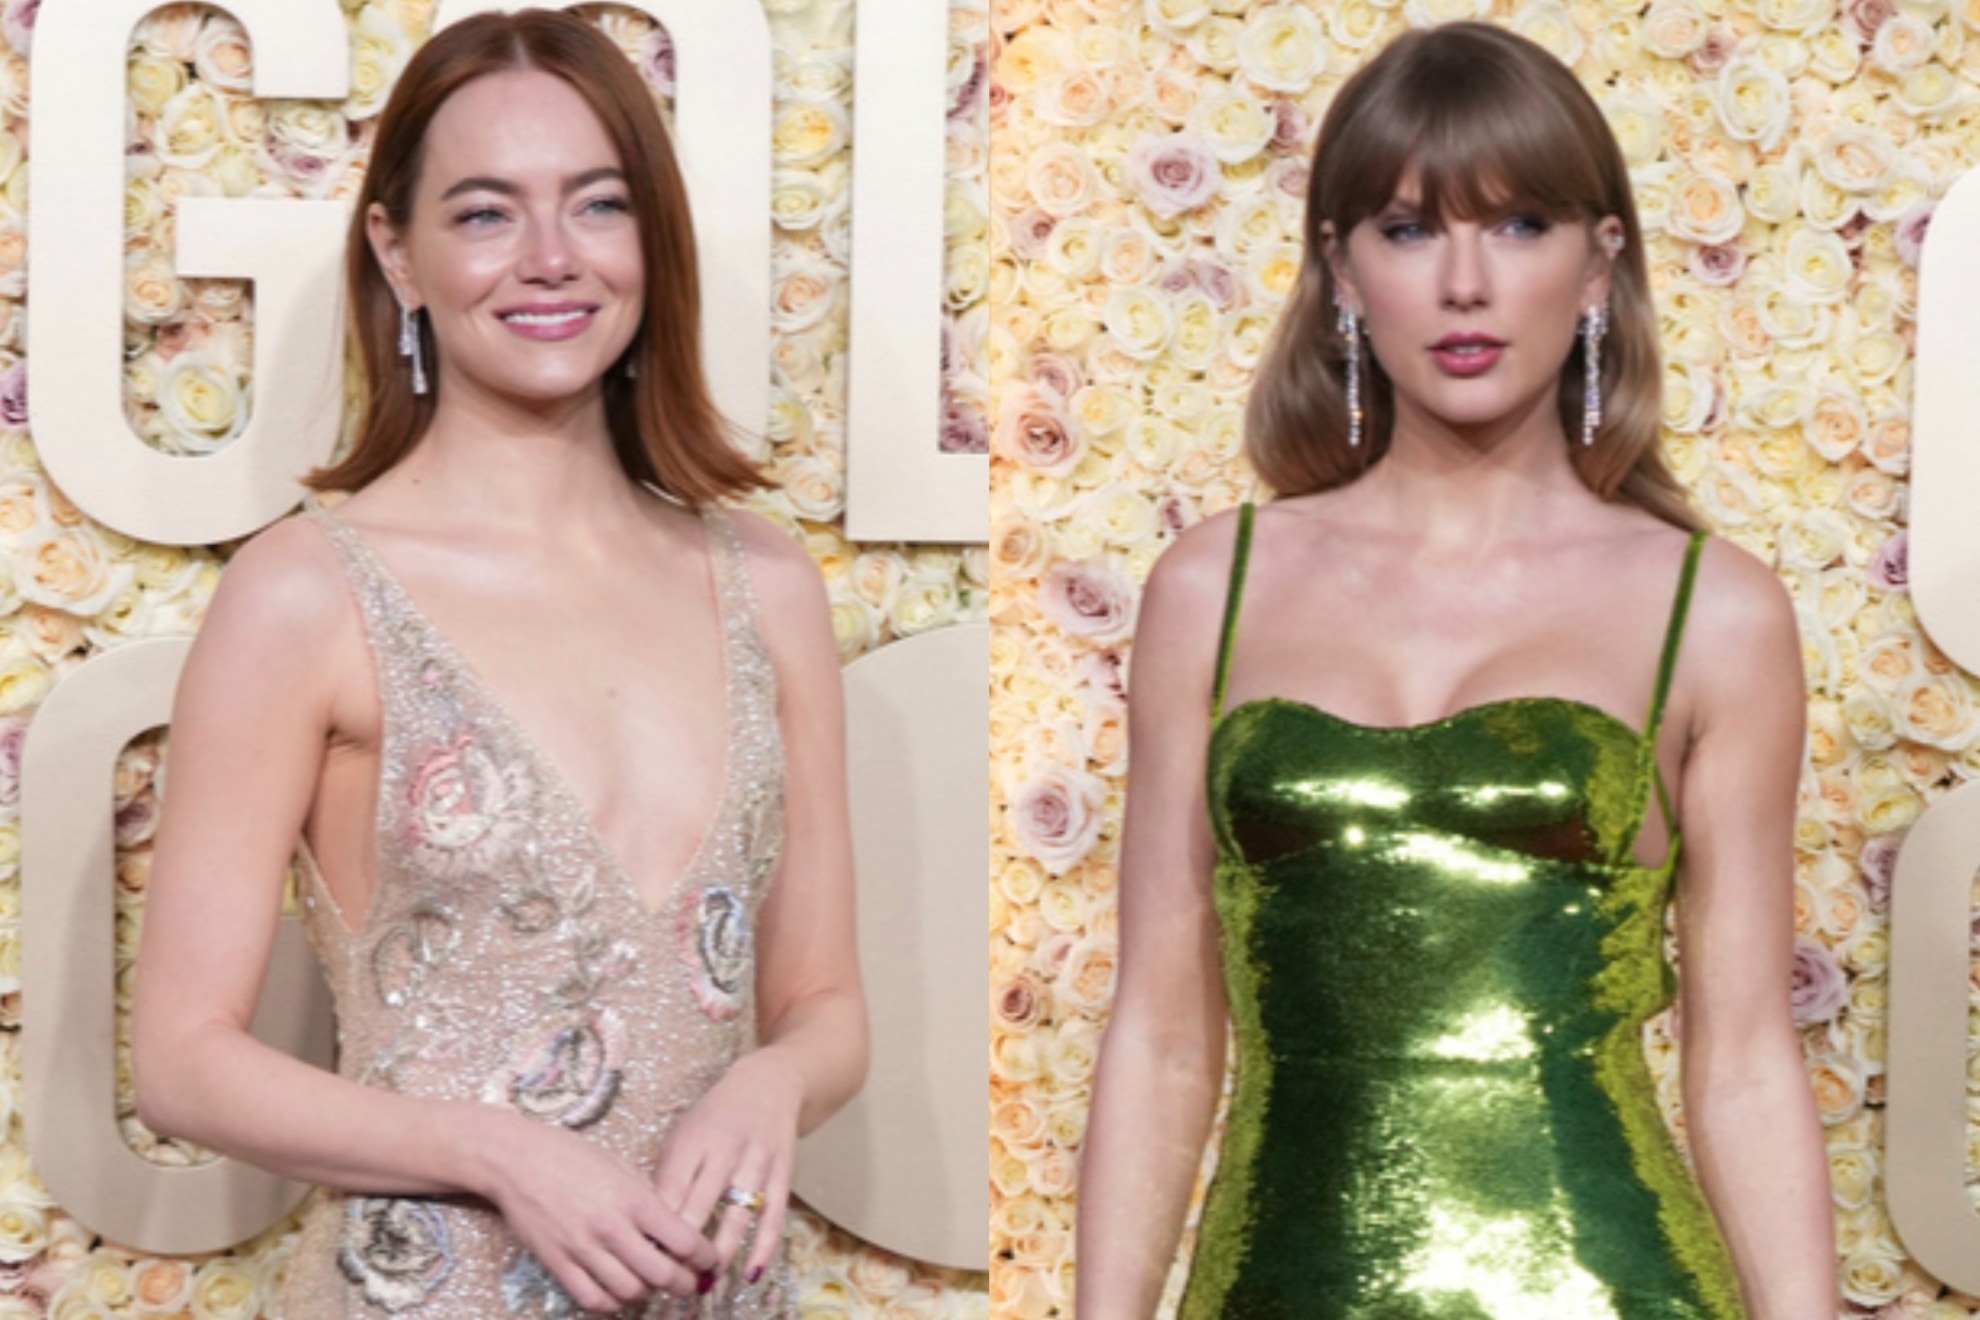 Emma Stone and Taylor Swift have been friends since 2008